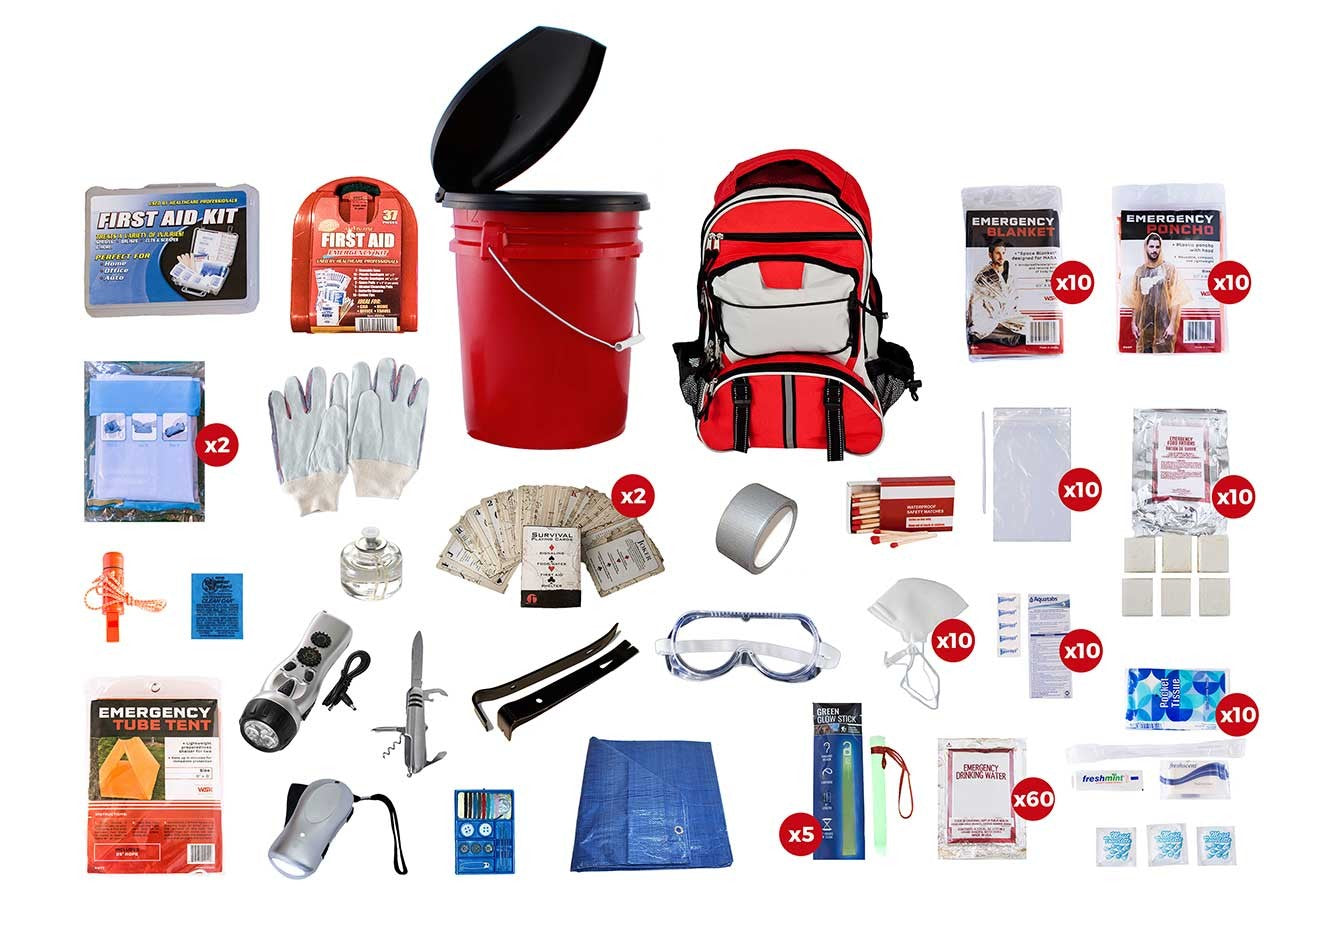 10 Person Survival Kit (72+ Hours) with Red Backpack